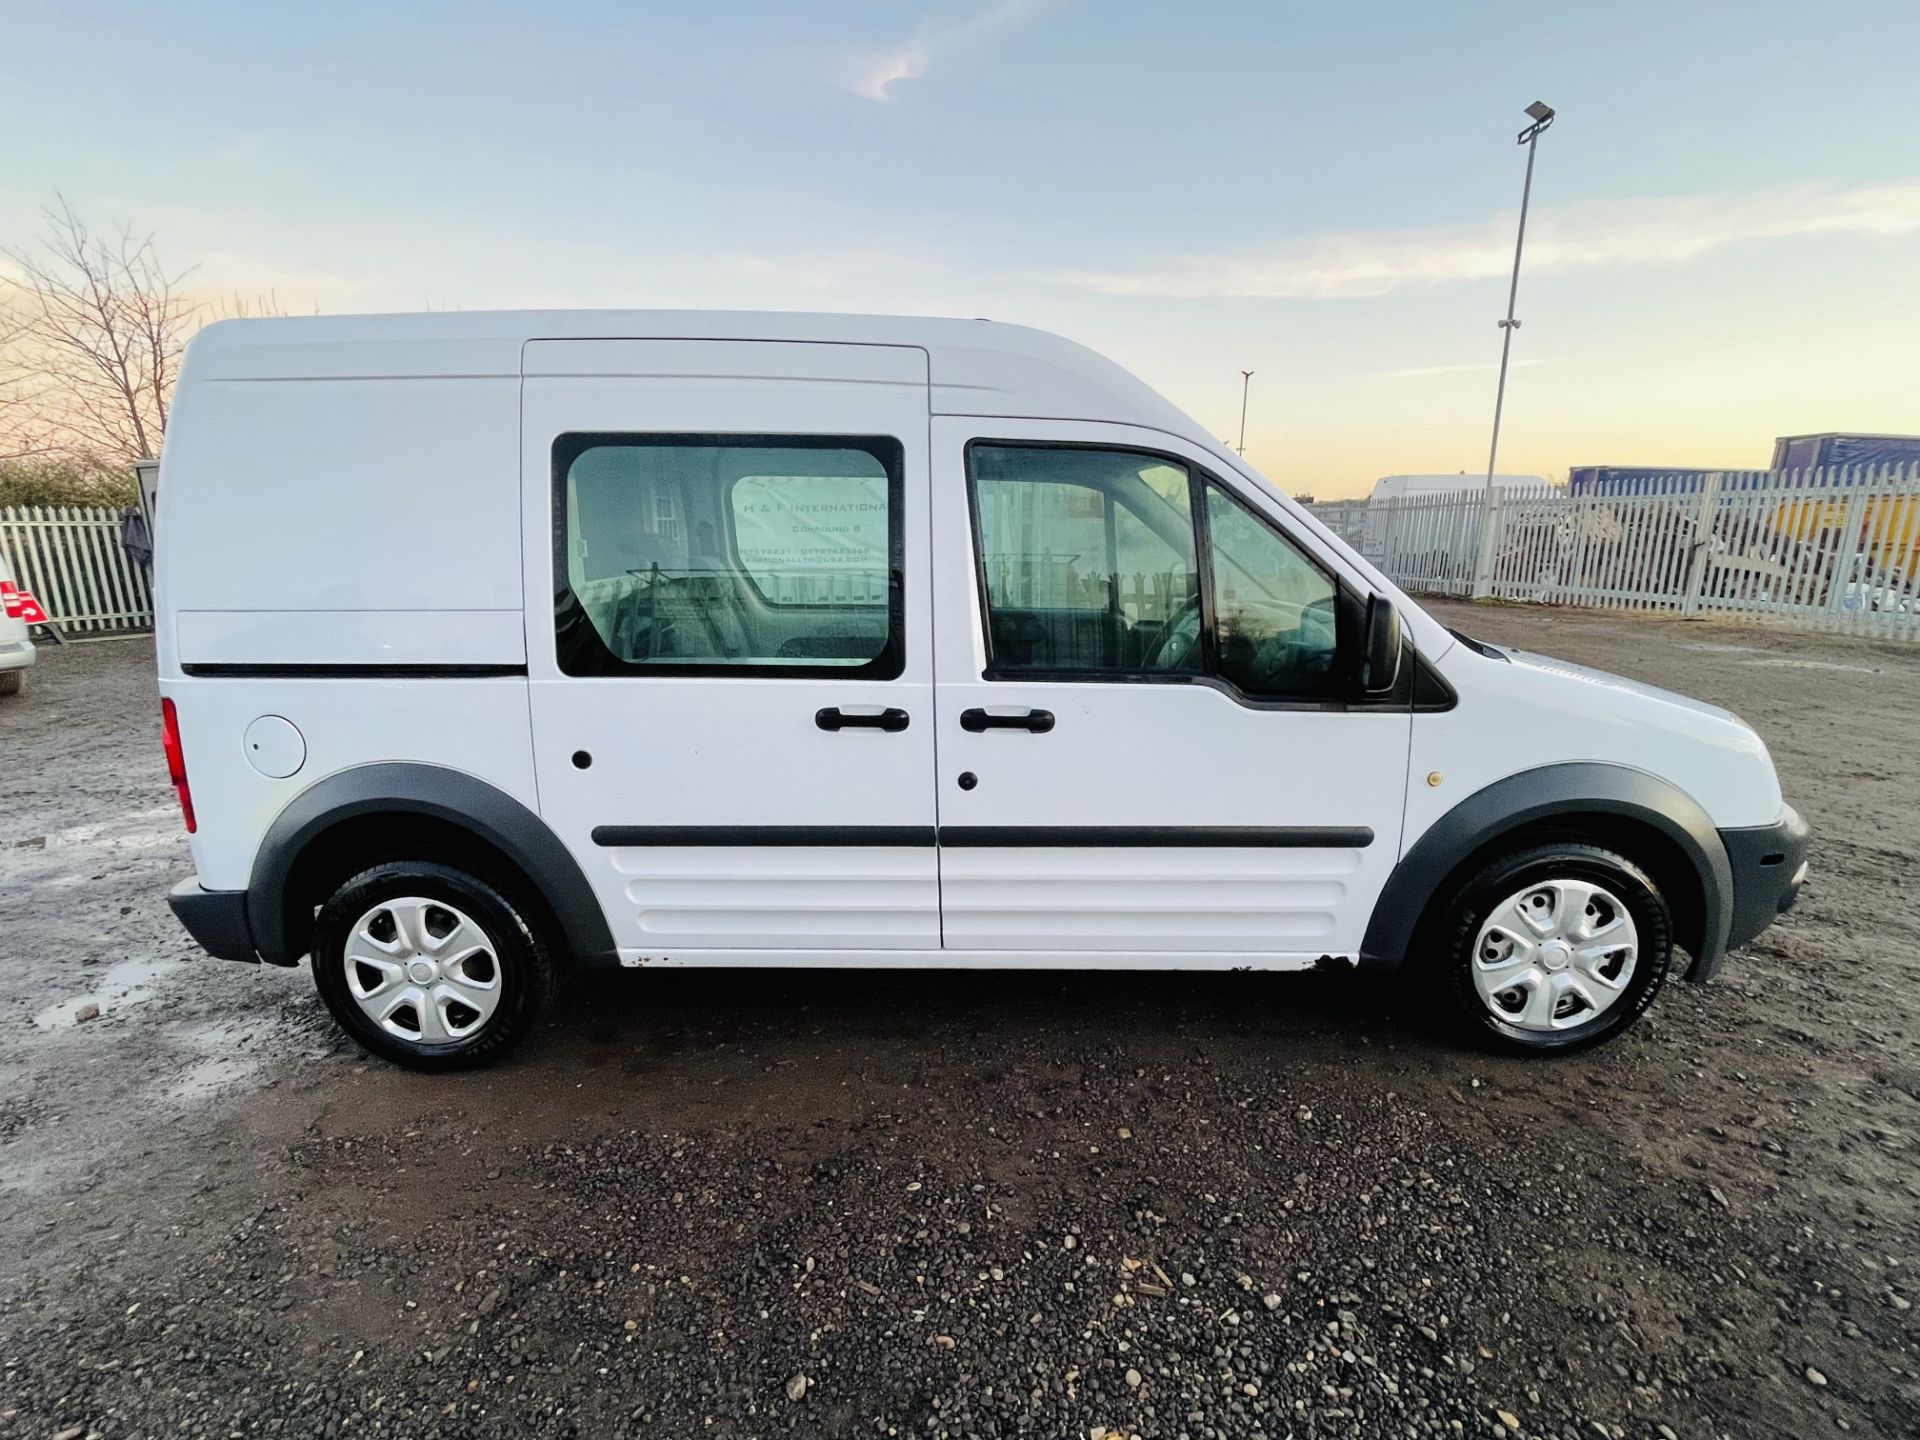 Ford Transit connect 1.8 TDCI LWB High Roof 2013 '13 Reg' A/C Elec pack - Image 14 of 21